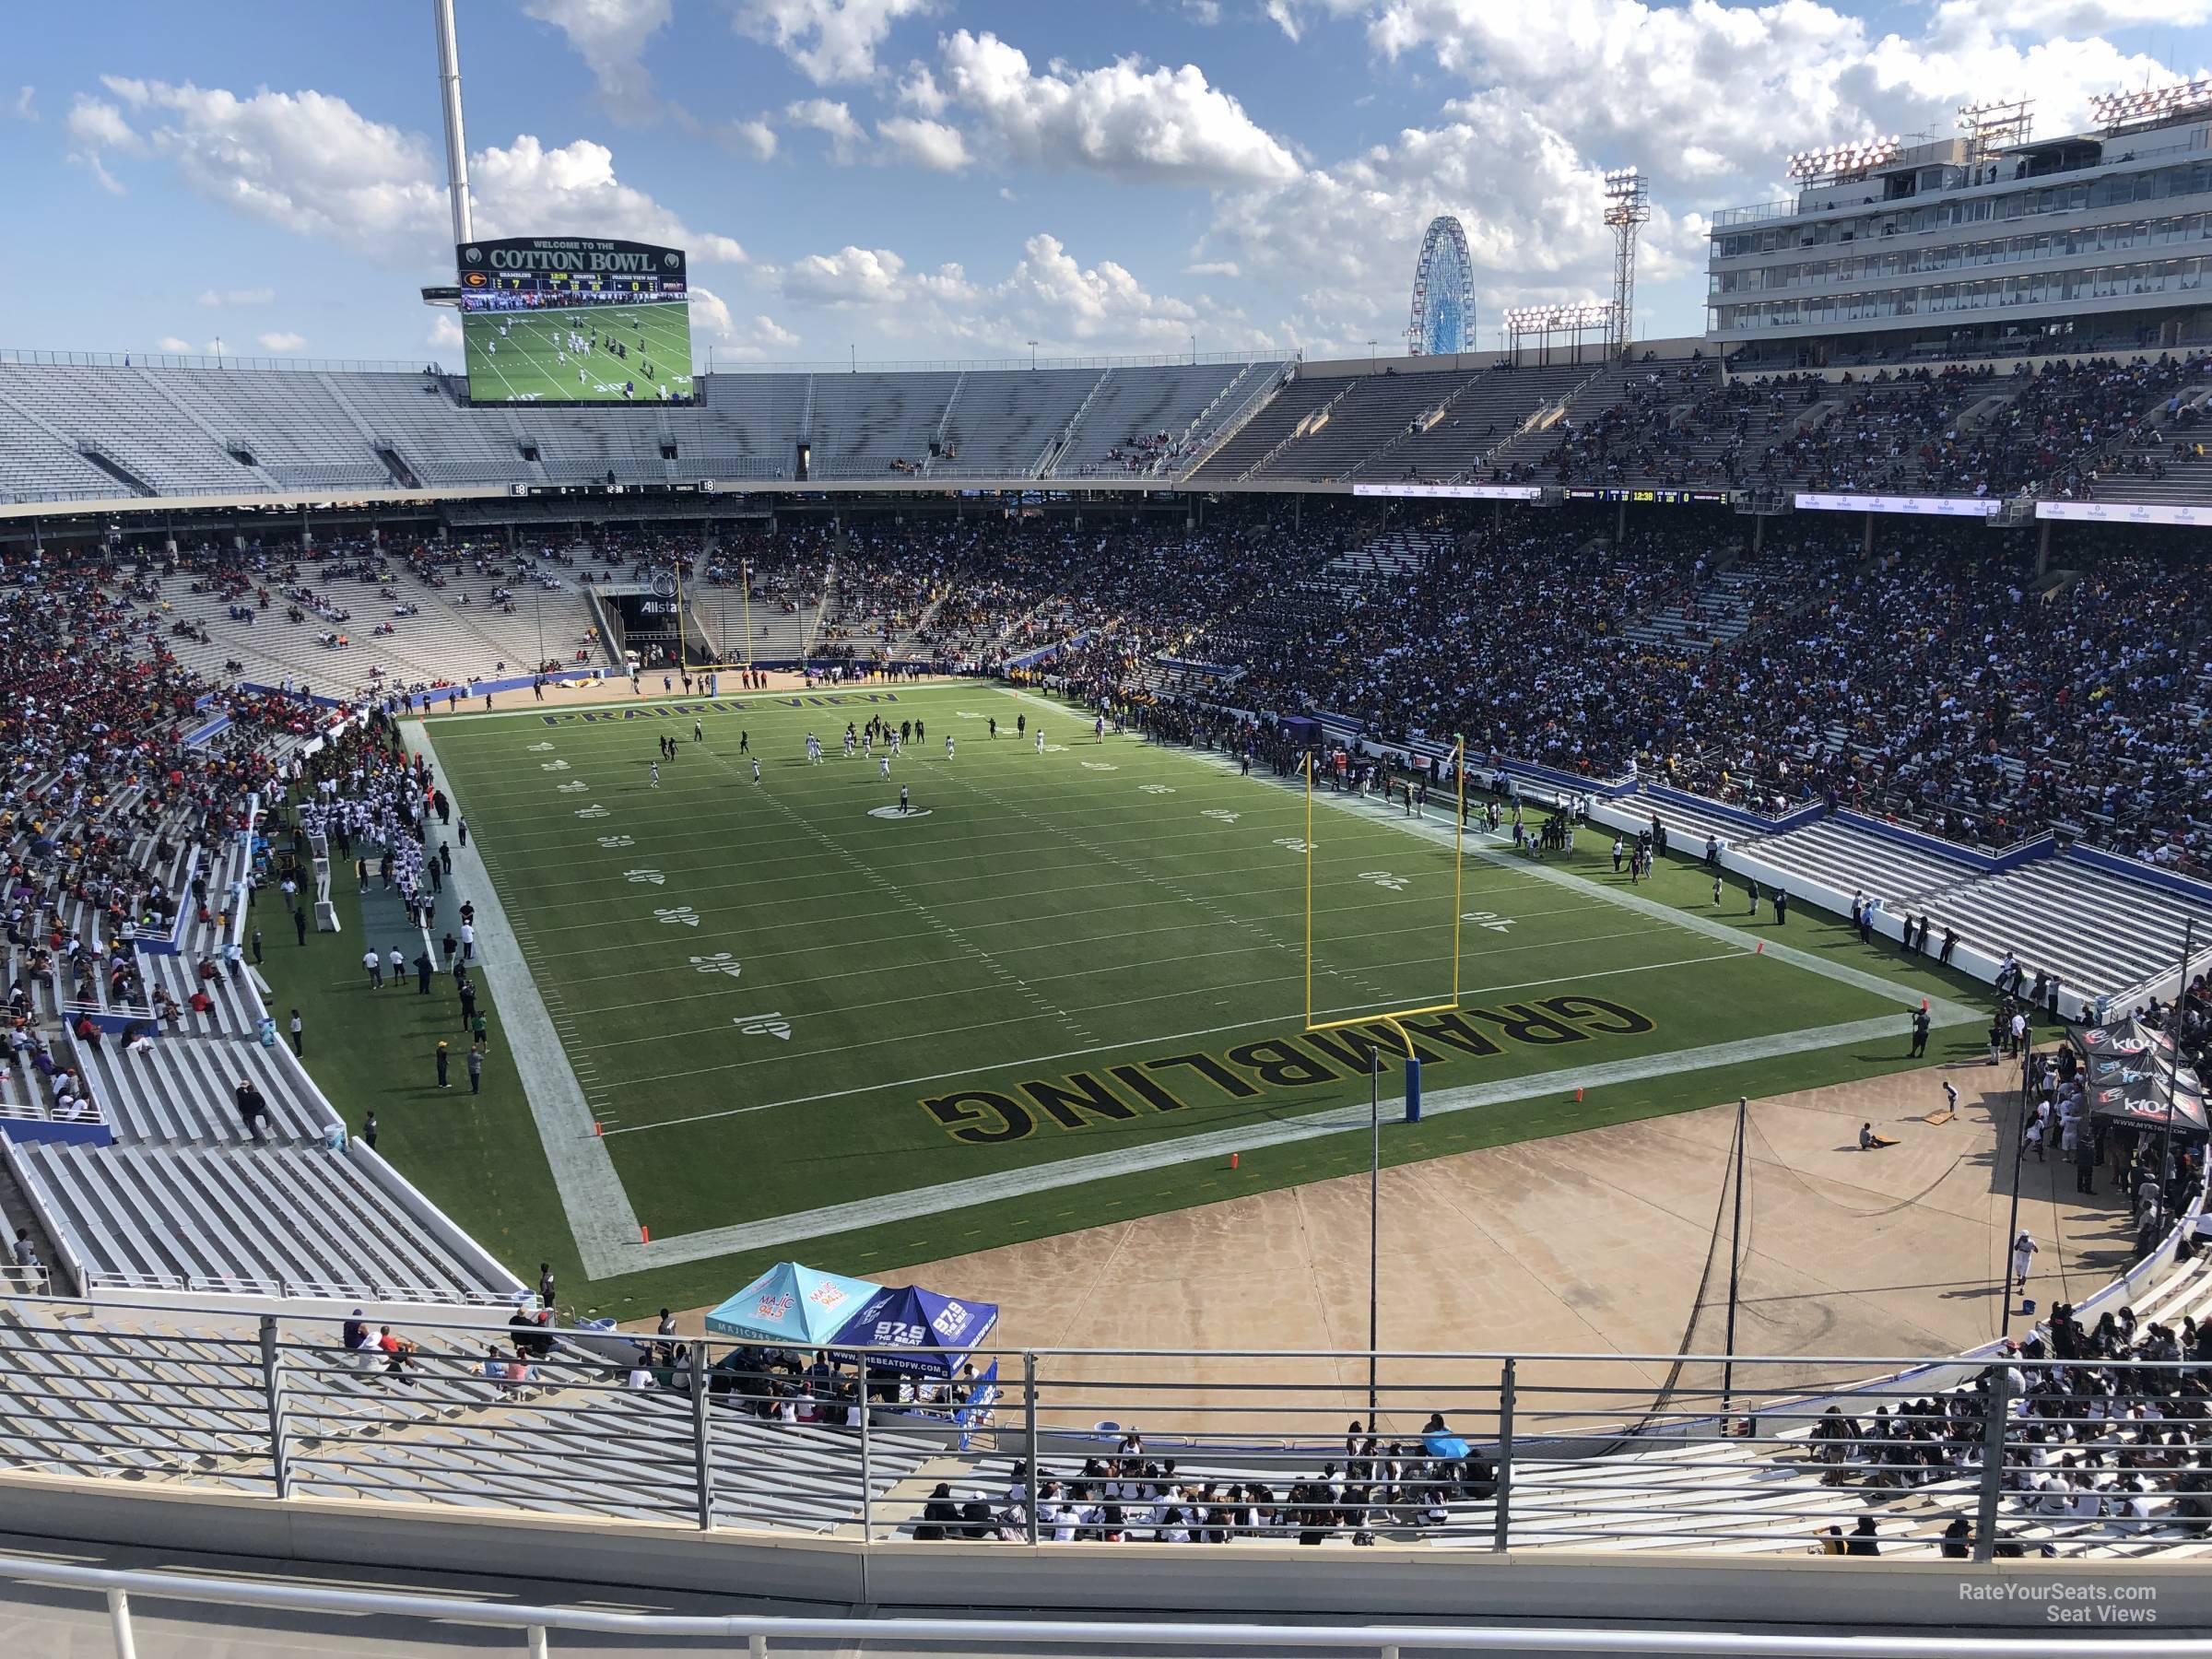 section 119, row 8 seat view  - cotton bowl